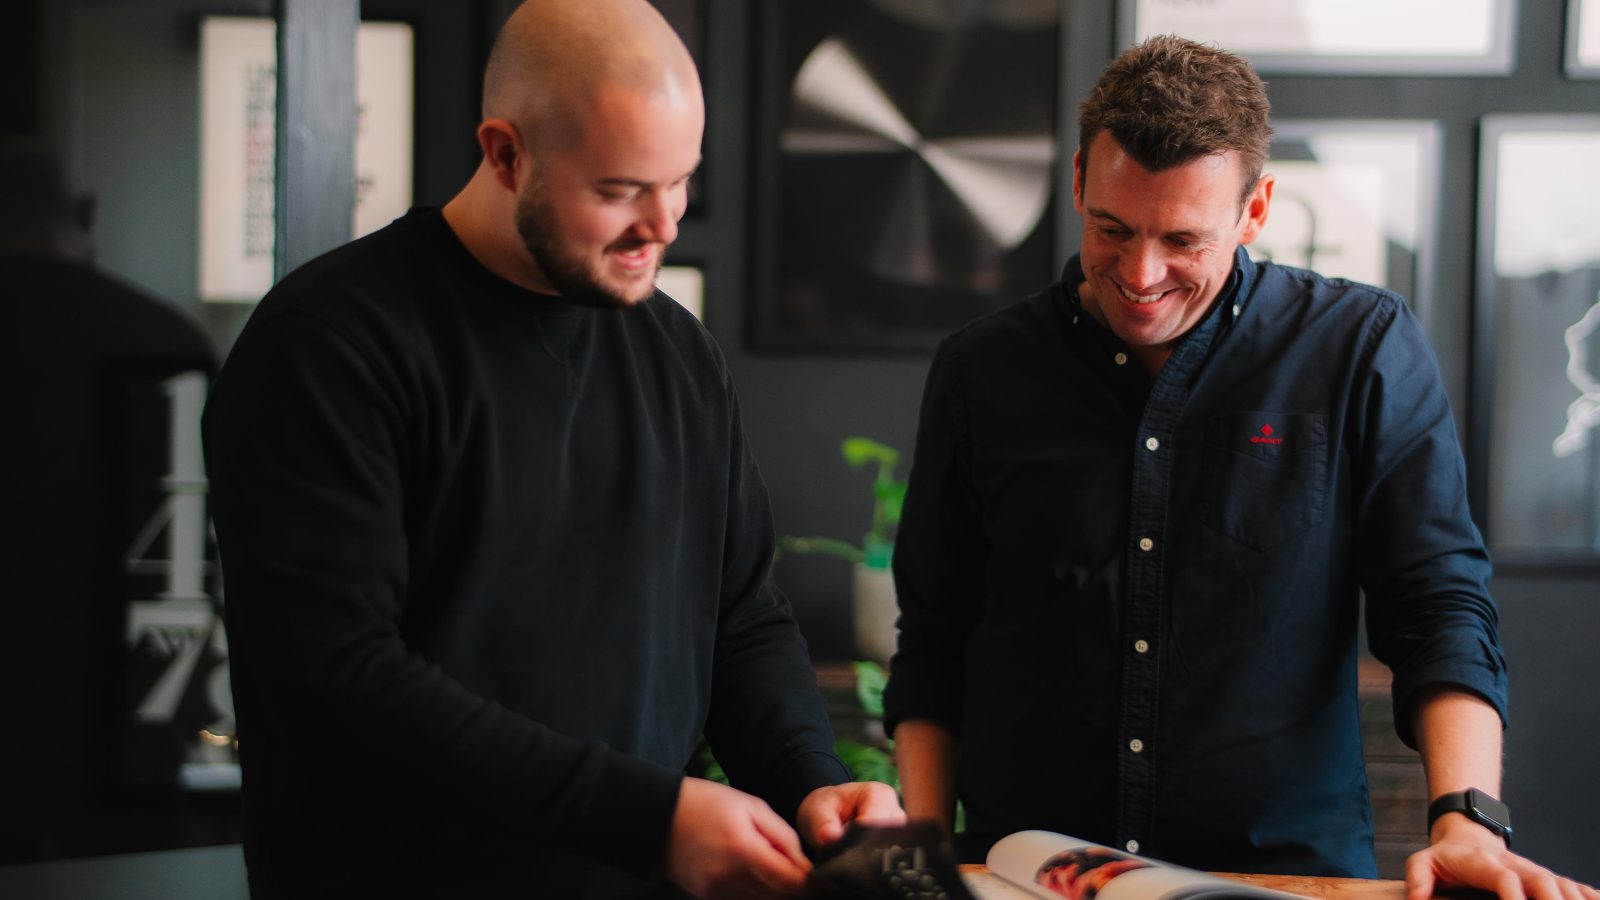 Two men, one bald and one with short hair, smiling and looking at a website design magazine together in a modern room with stylish decor.